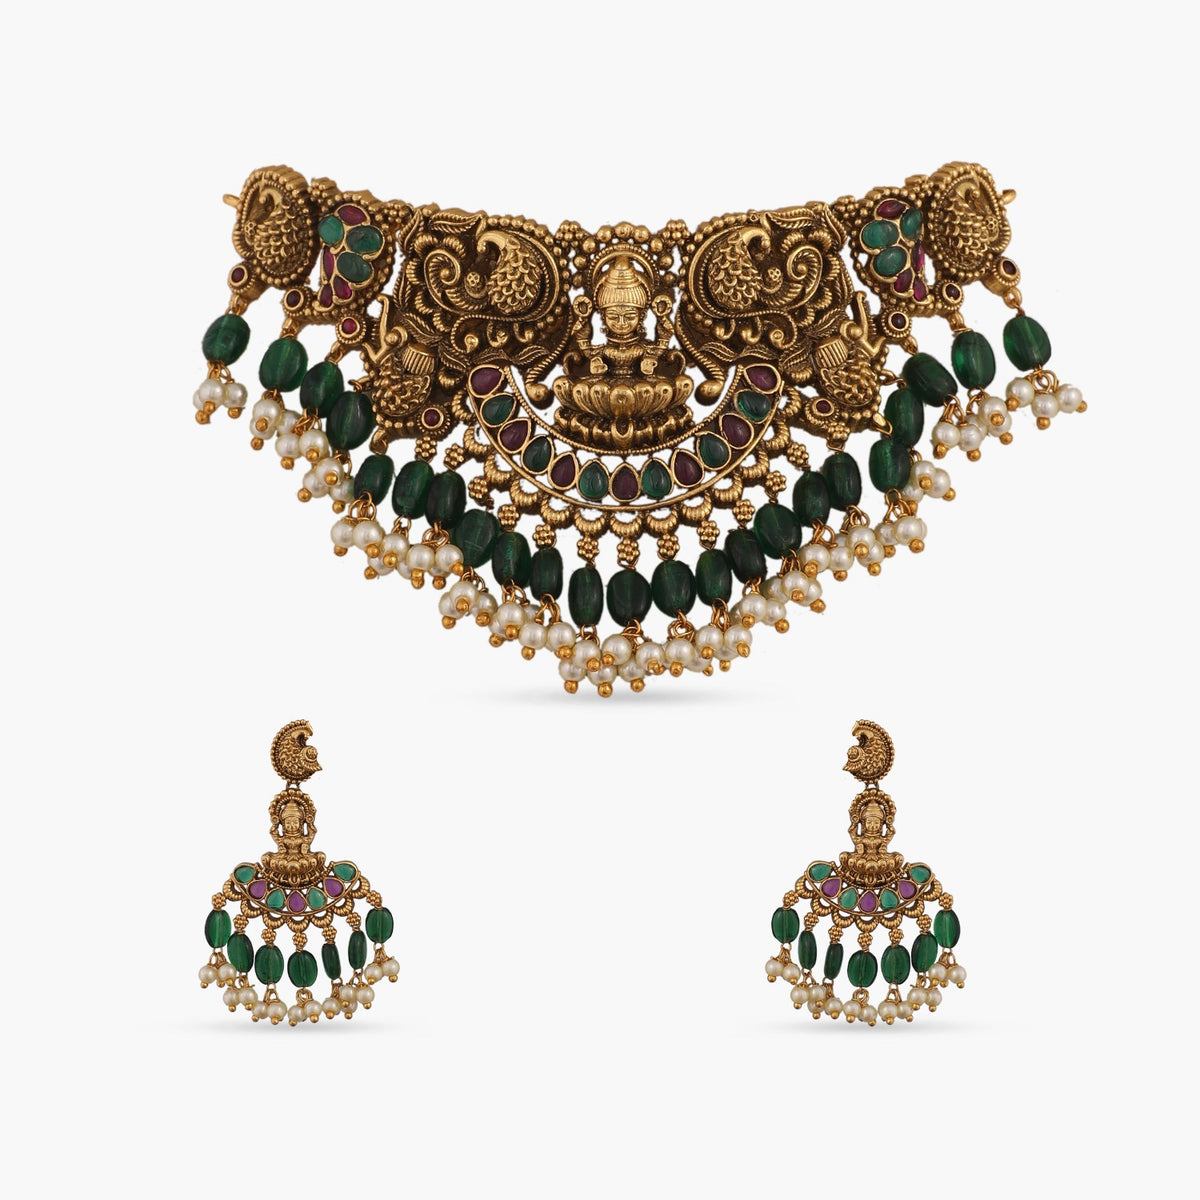 A picture of Indian artificial jewelry. It is an antique gold plated choker with green beads, divine Laxmi pendant and peacock motifs.